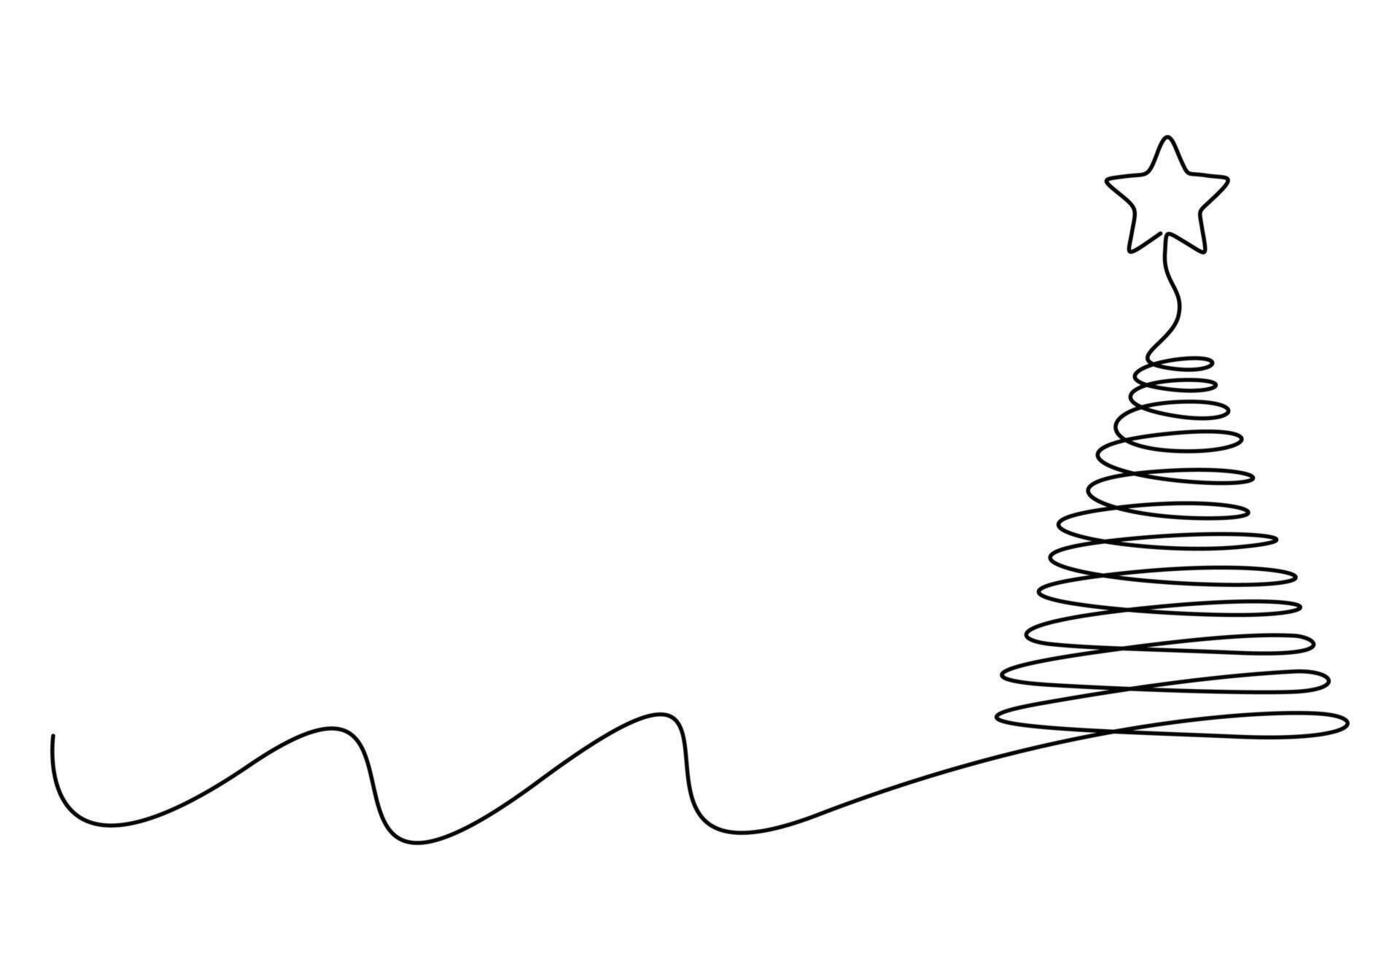 Christmas tree continuous one line drawing vector illustration. Isolated on white background vector illustration